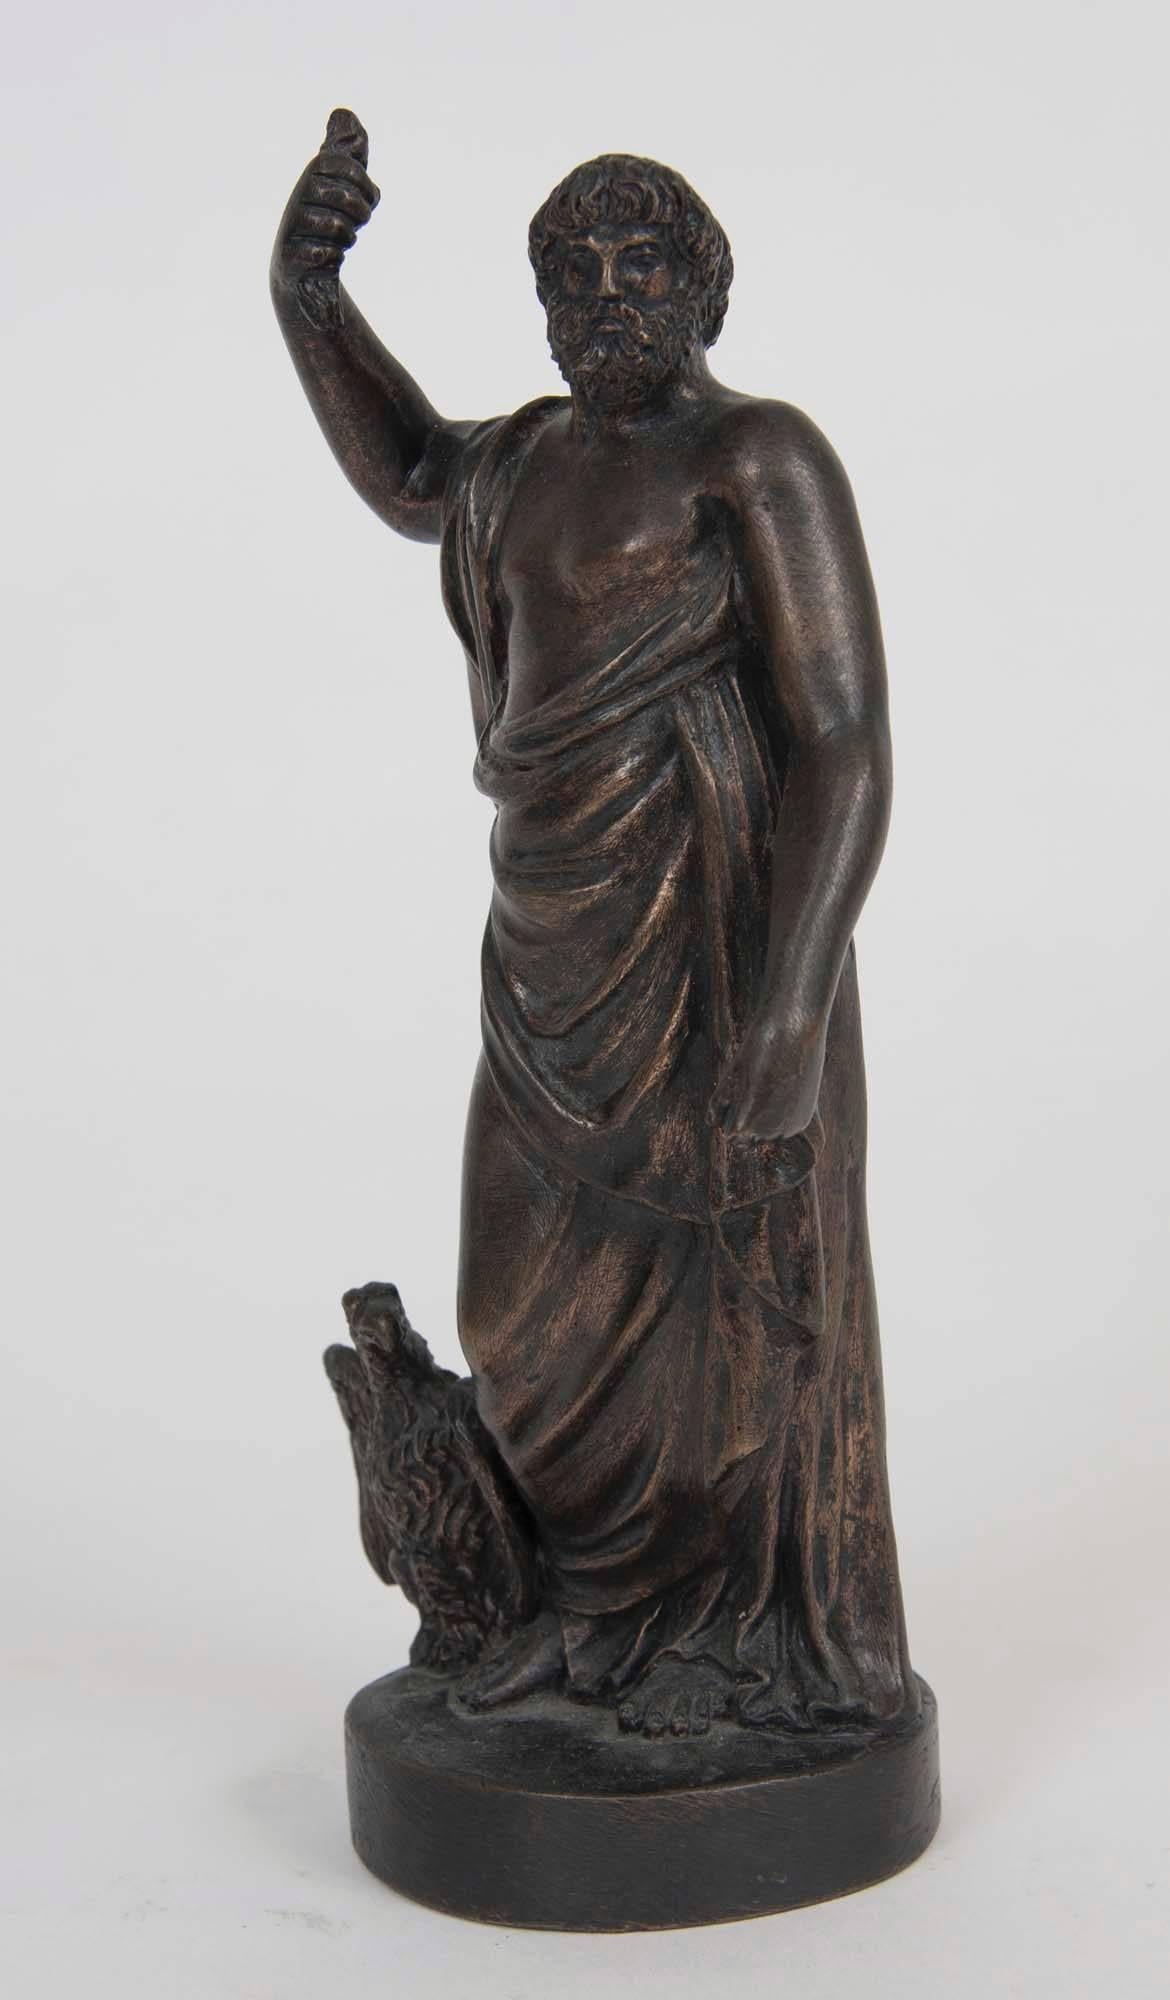 Bronze figure of Zeus attended by eagle, his symbolic form.